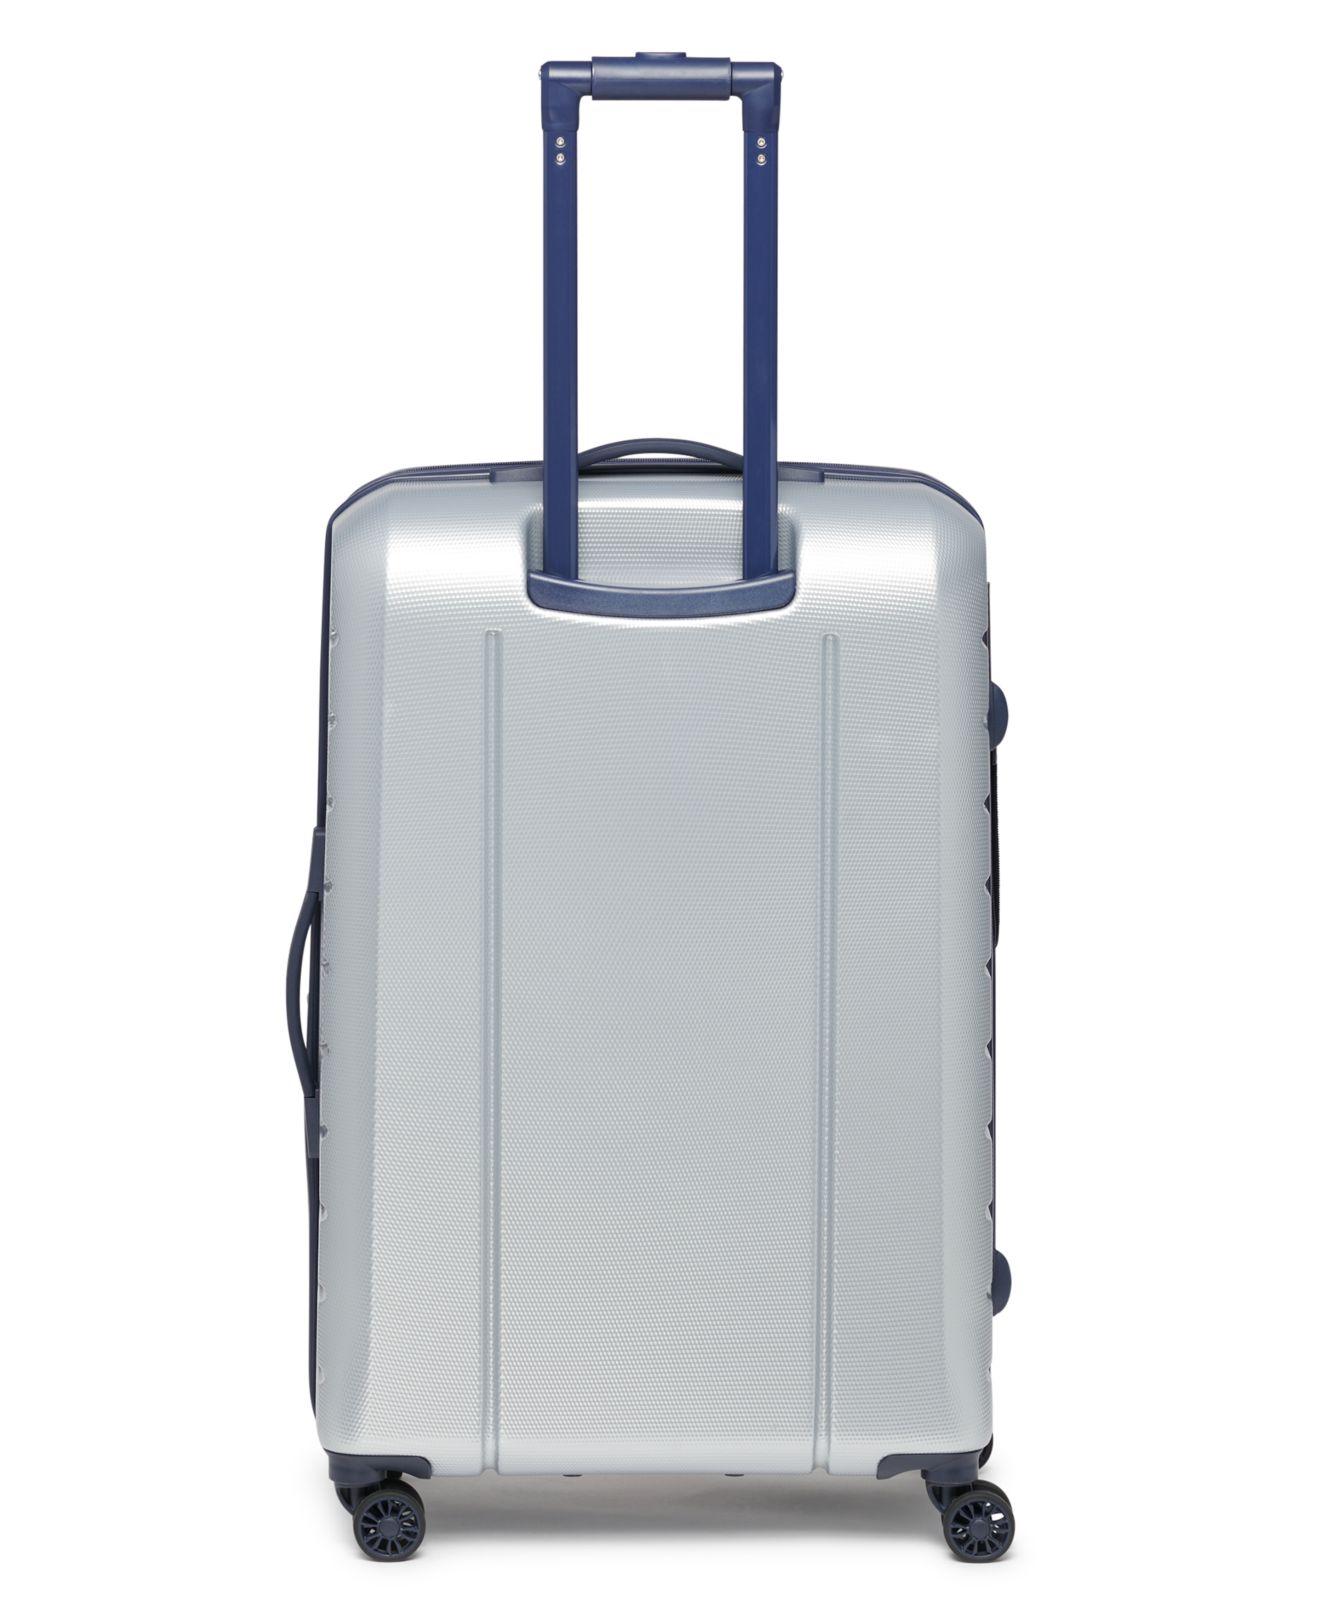 Tommy Hilfiger Riverdale 28" Check-in Luggage, Created For Macy's in